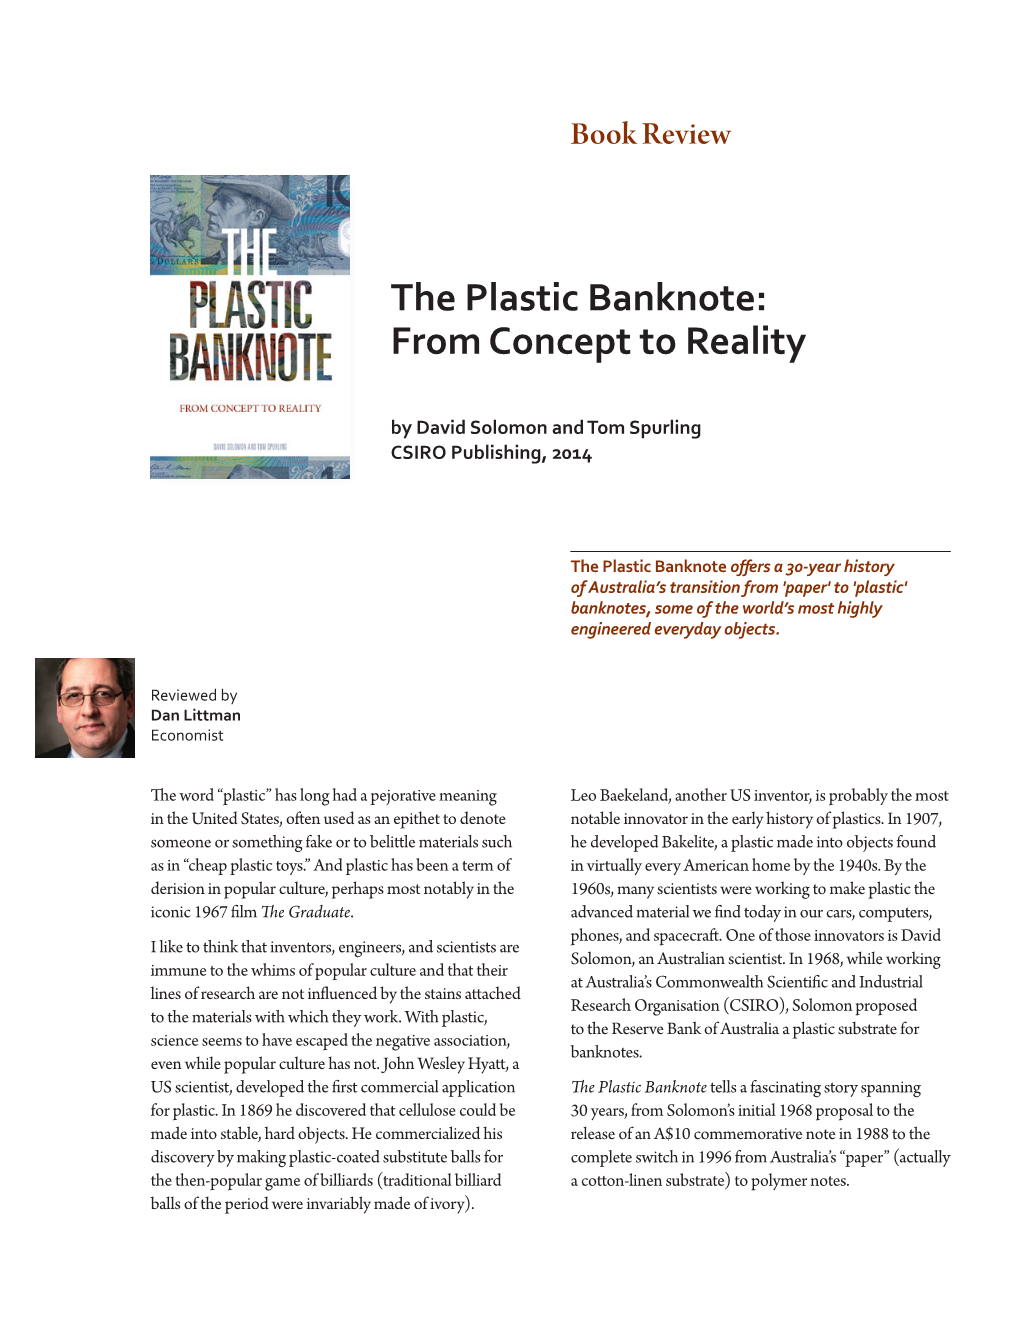 The Plastic Banknote: from Concept to Reality